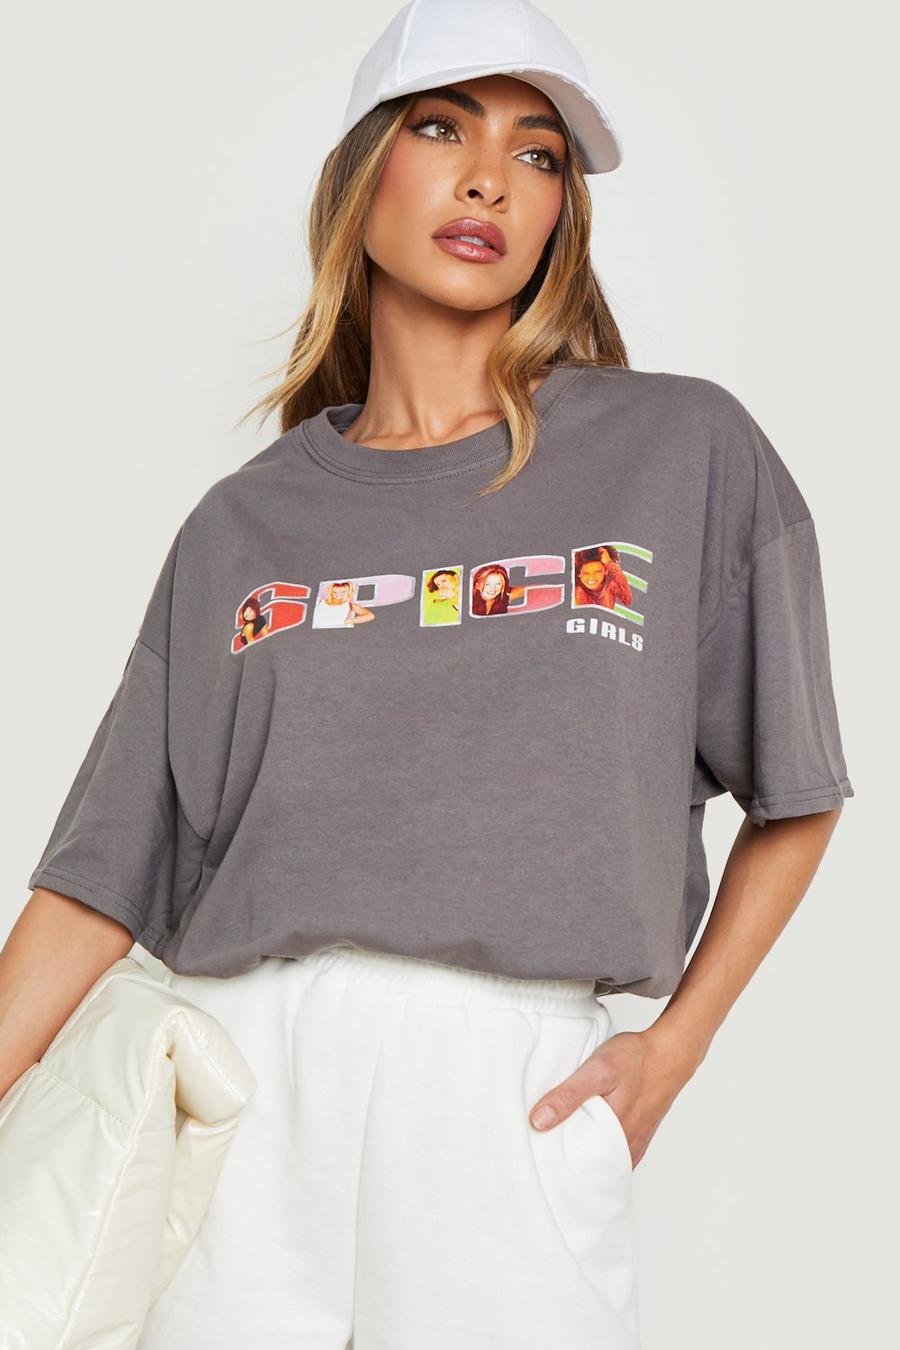 Charcoal grey Spice Girls Oversized Band T-shirt